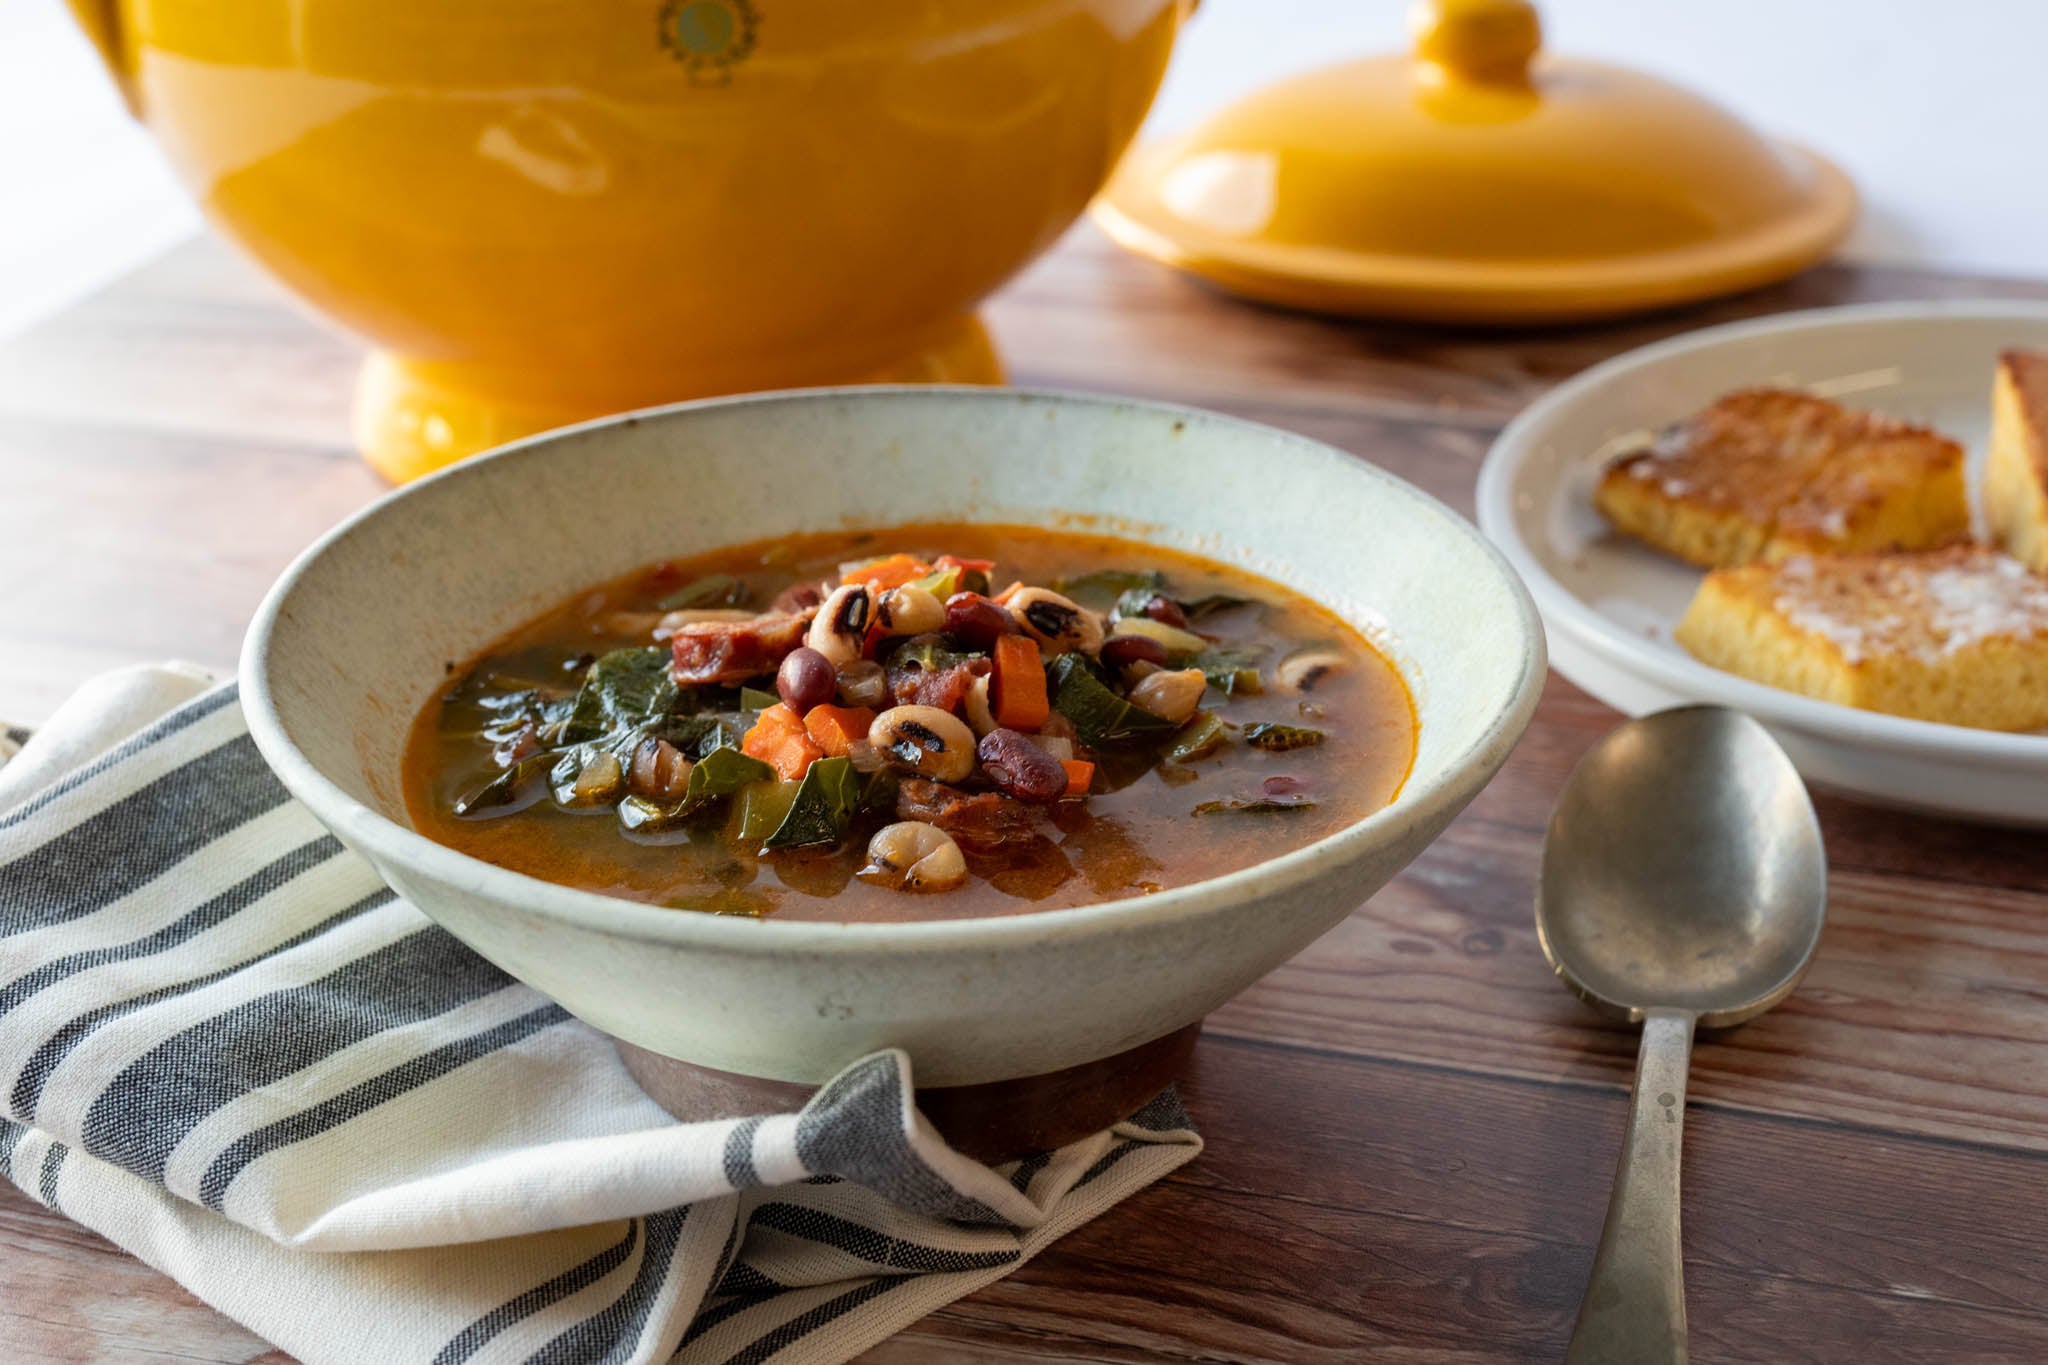 New Orleans Red Bean Soup with Sausage and Collard Greens with cornbread